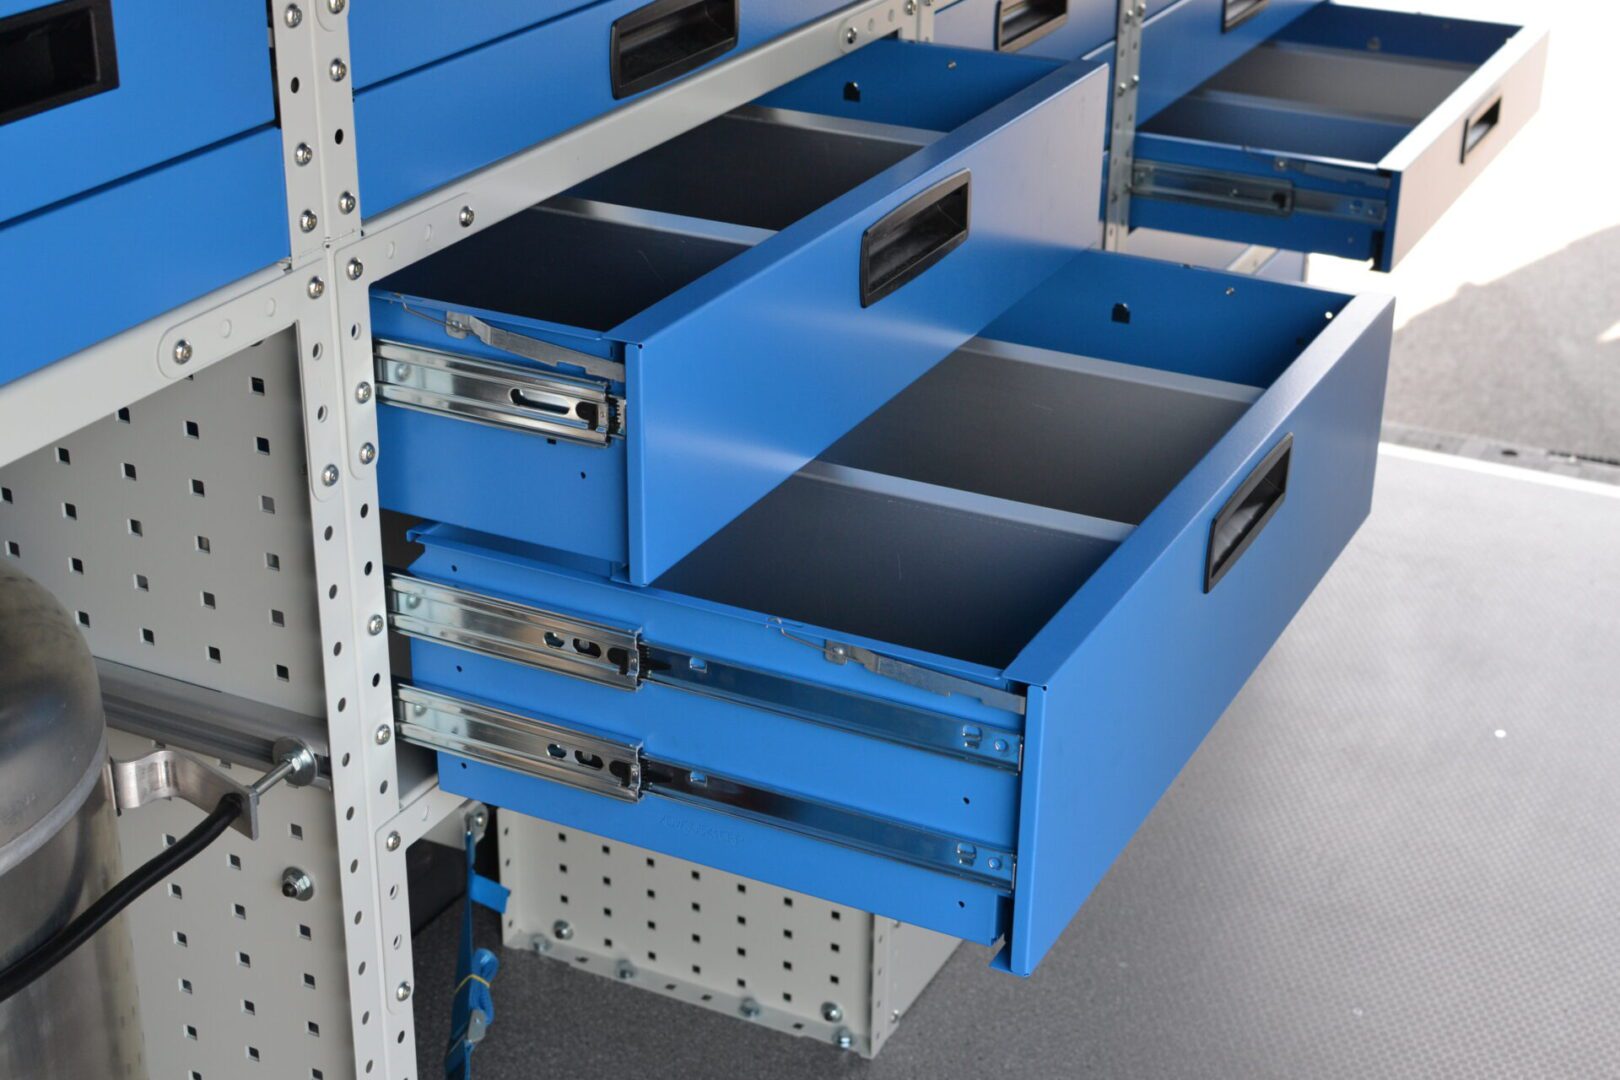 MAN van racking system for mechanic view steel drawers in open position